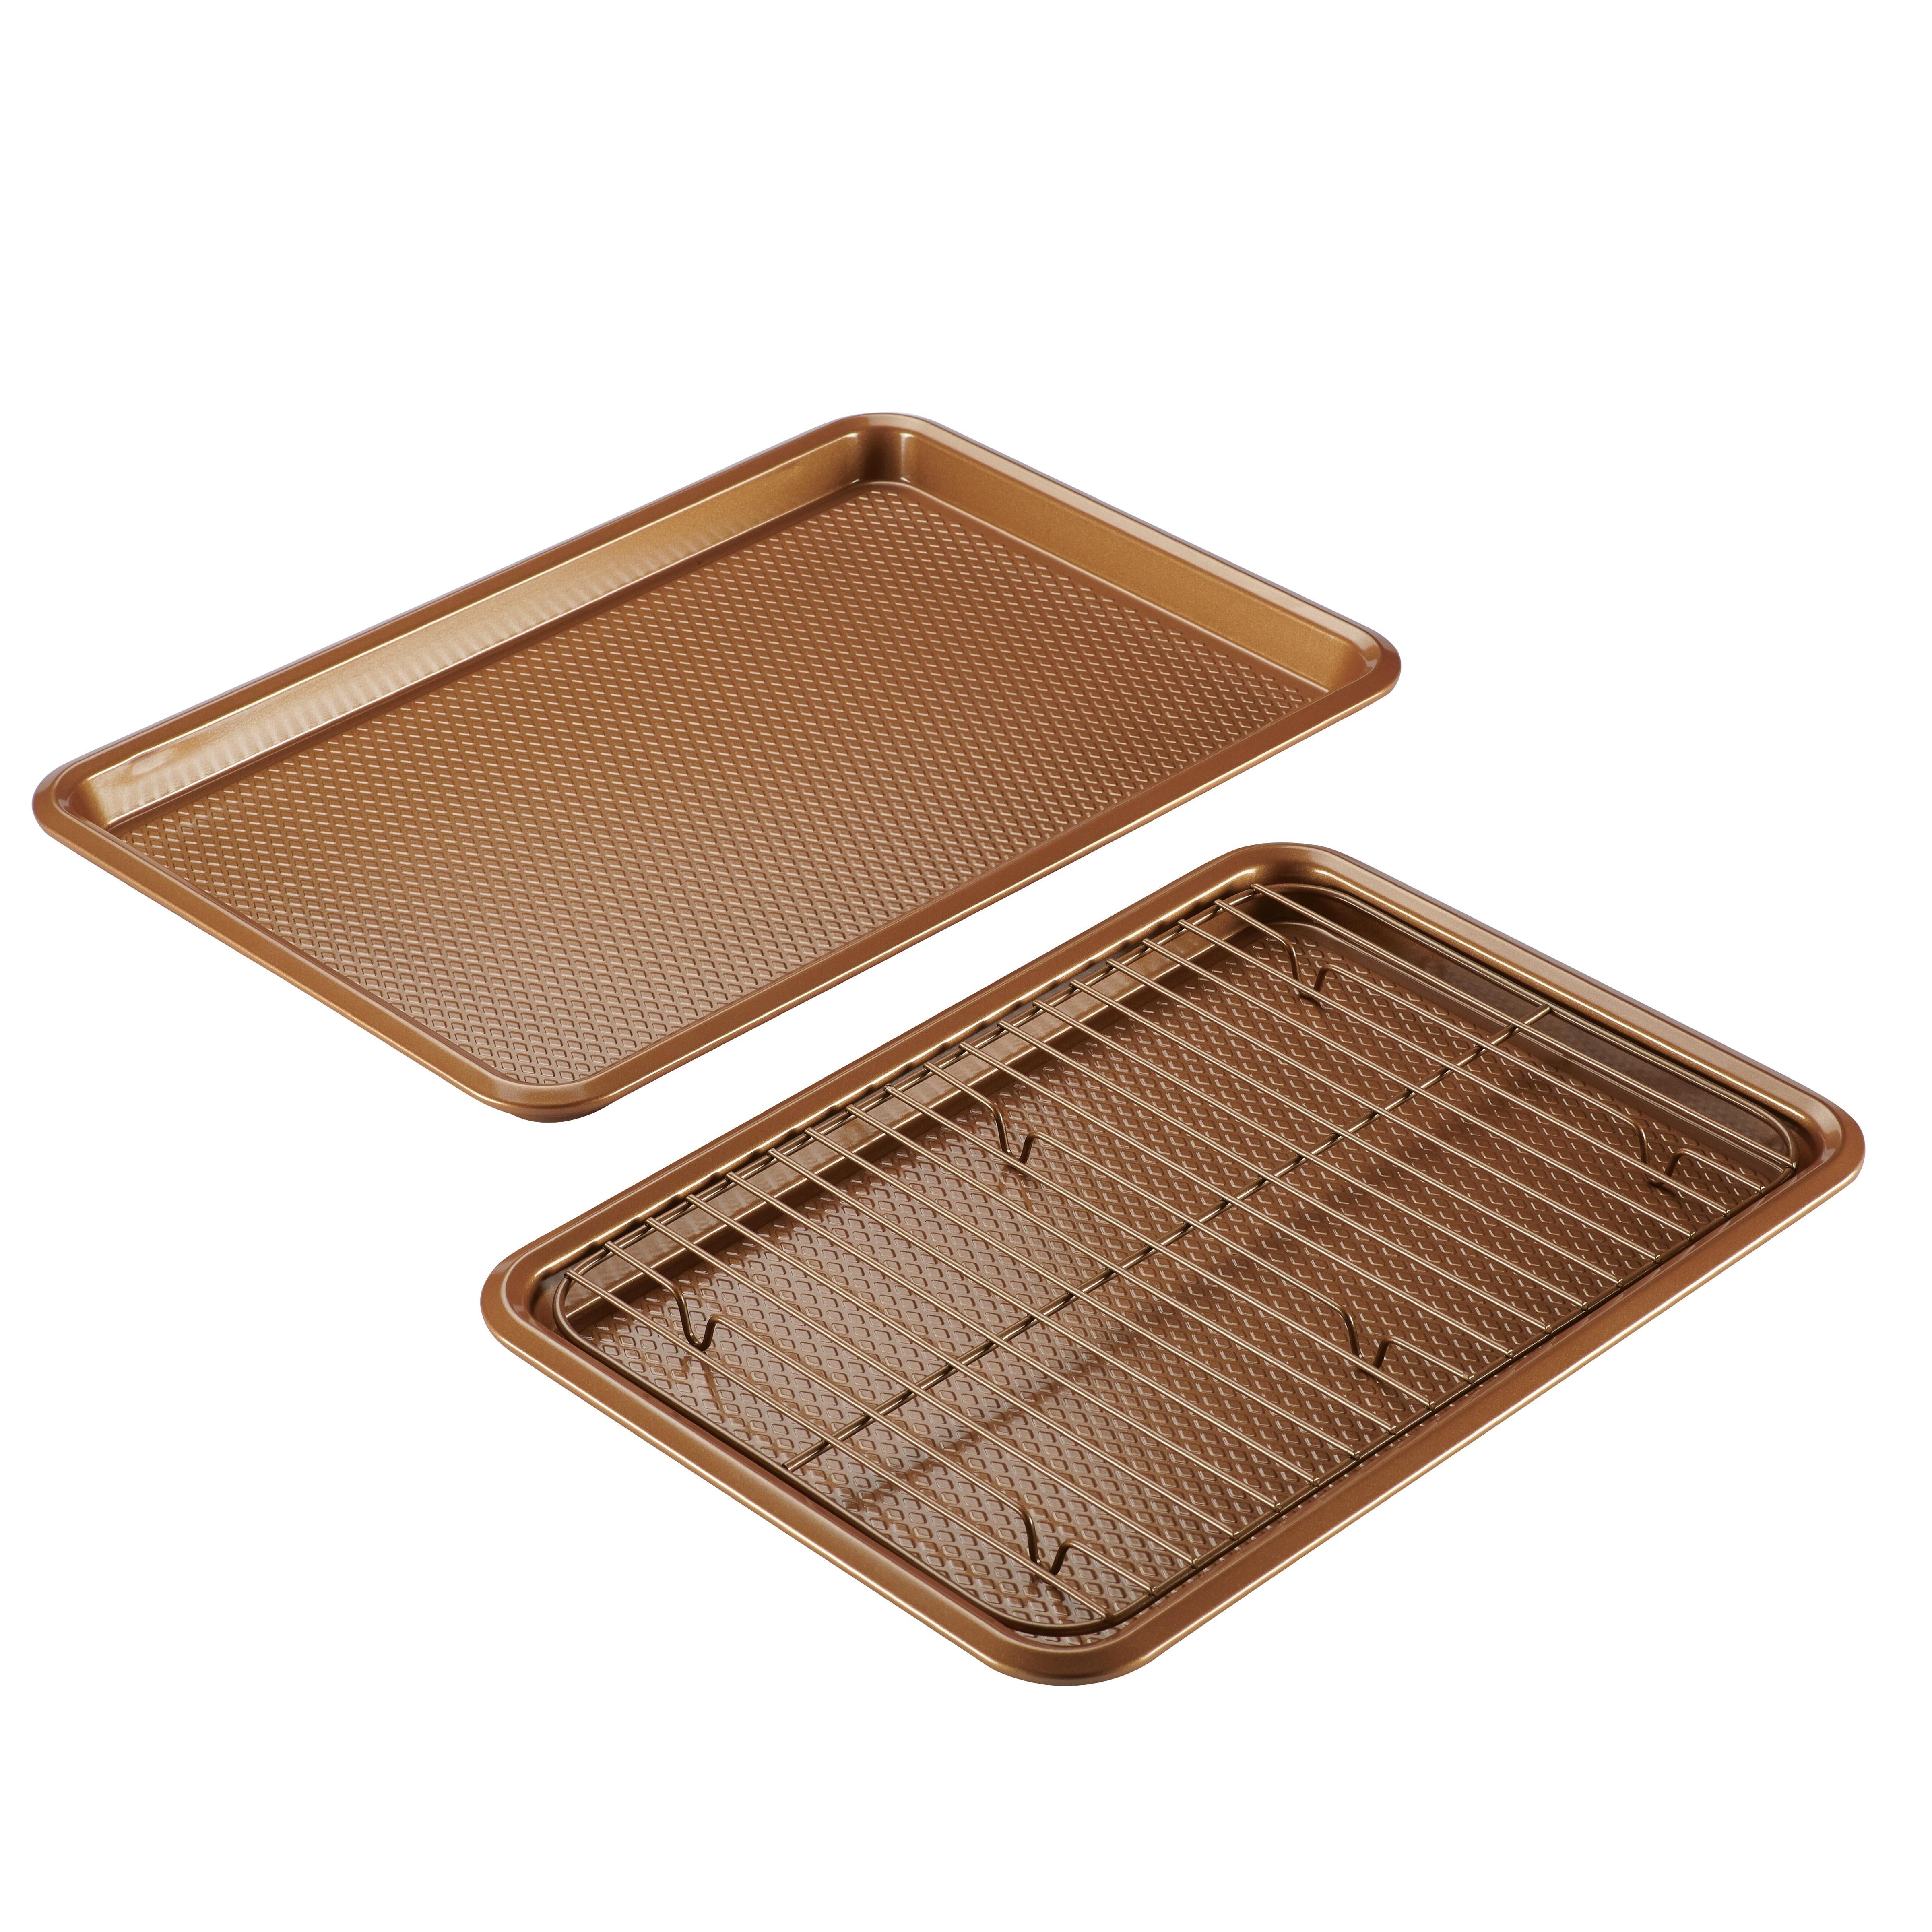 3pc Bakeware Set Copper - 2 Cookie Pans w/ Cooling Rack